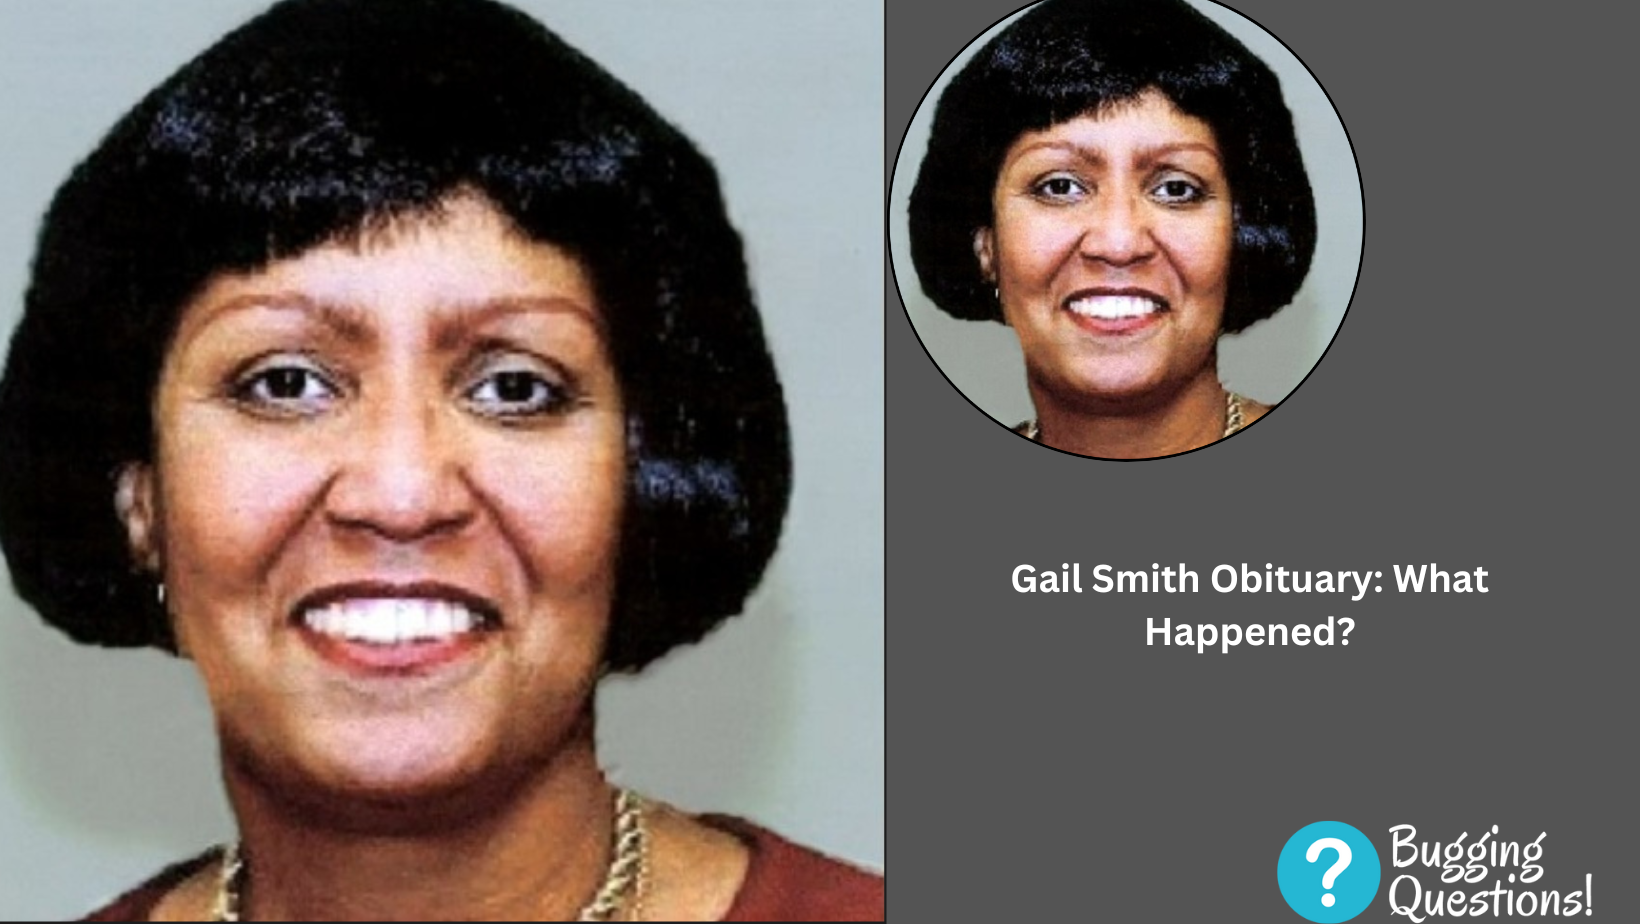 Gail Smith Obituary: What Happened?